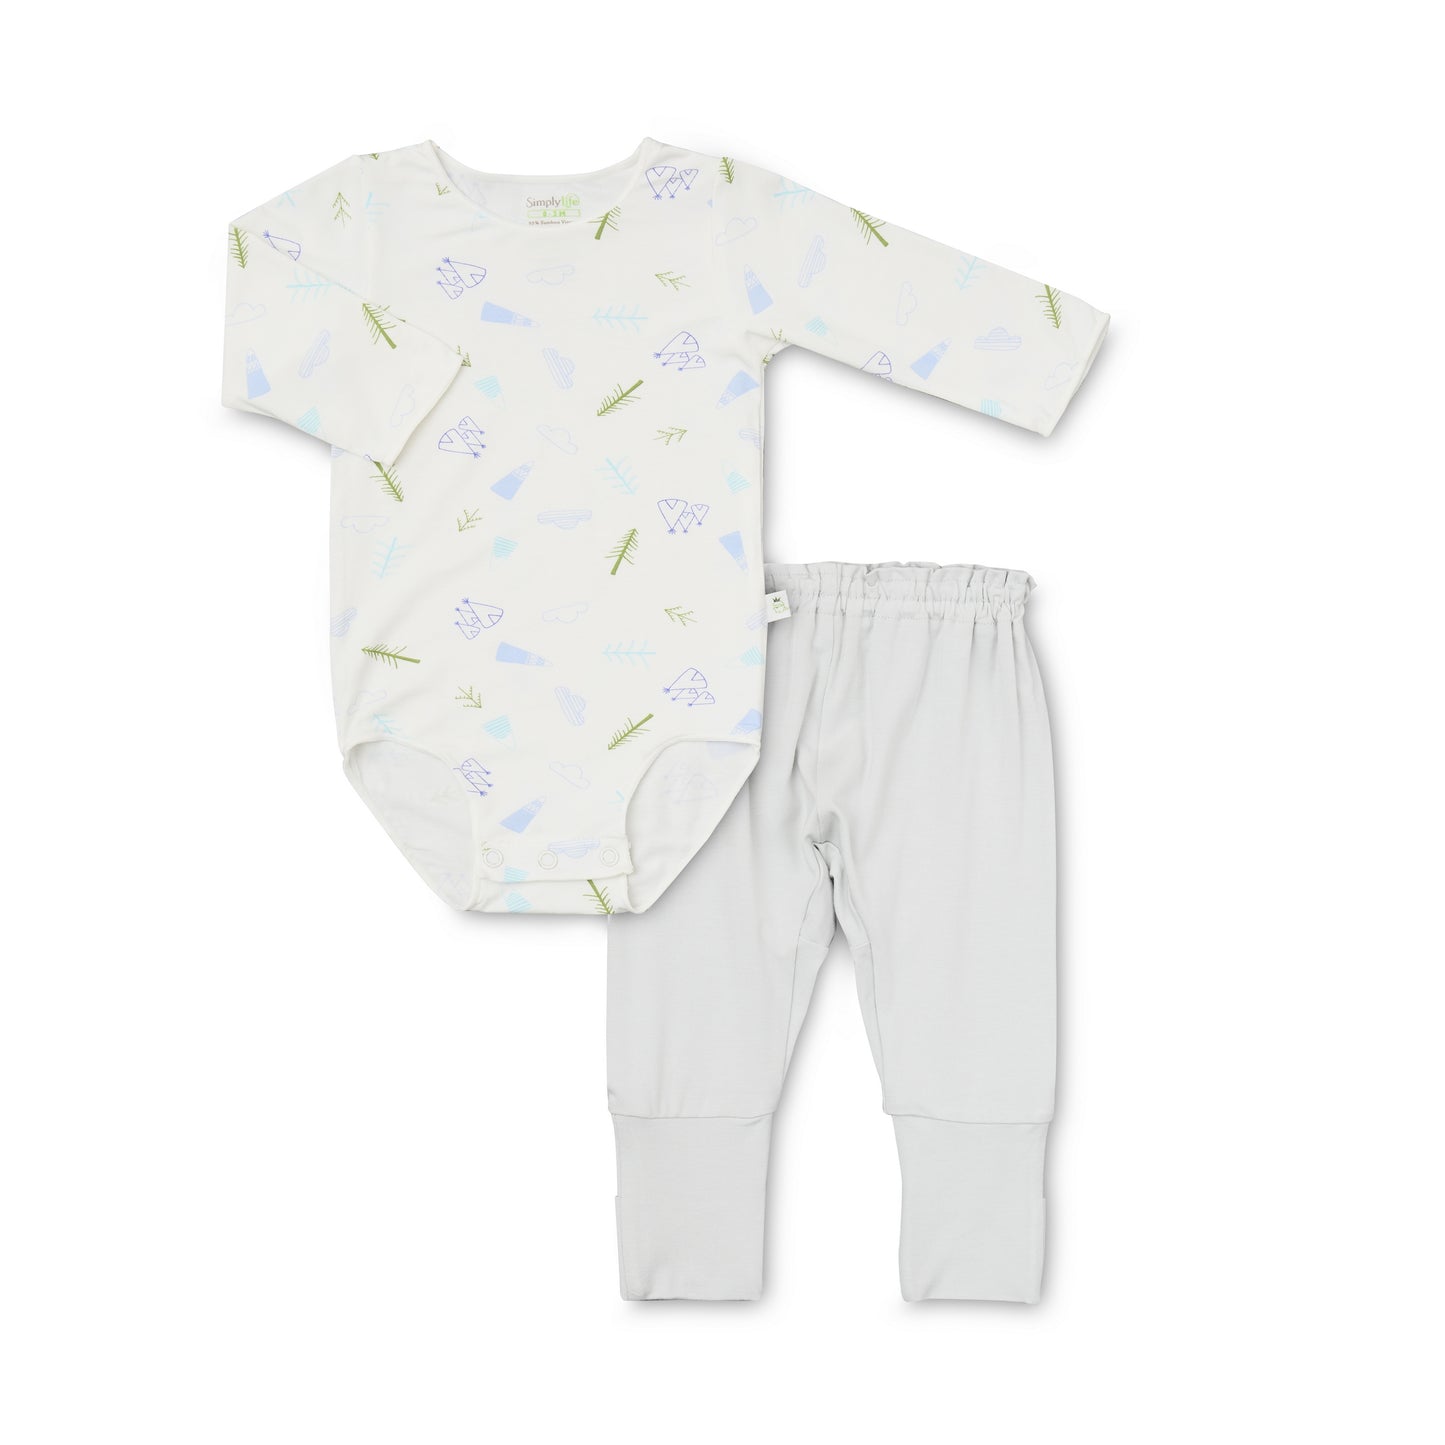 Long-sleeved Stretchy Romper with Footie Pants Set